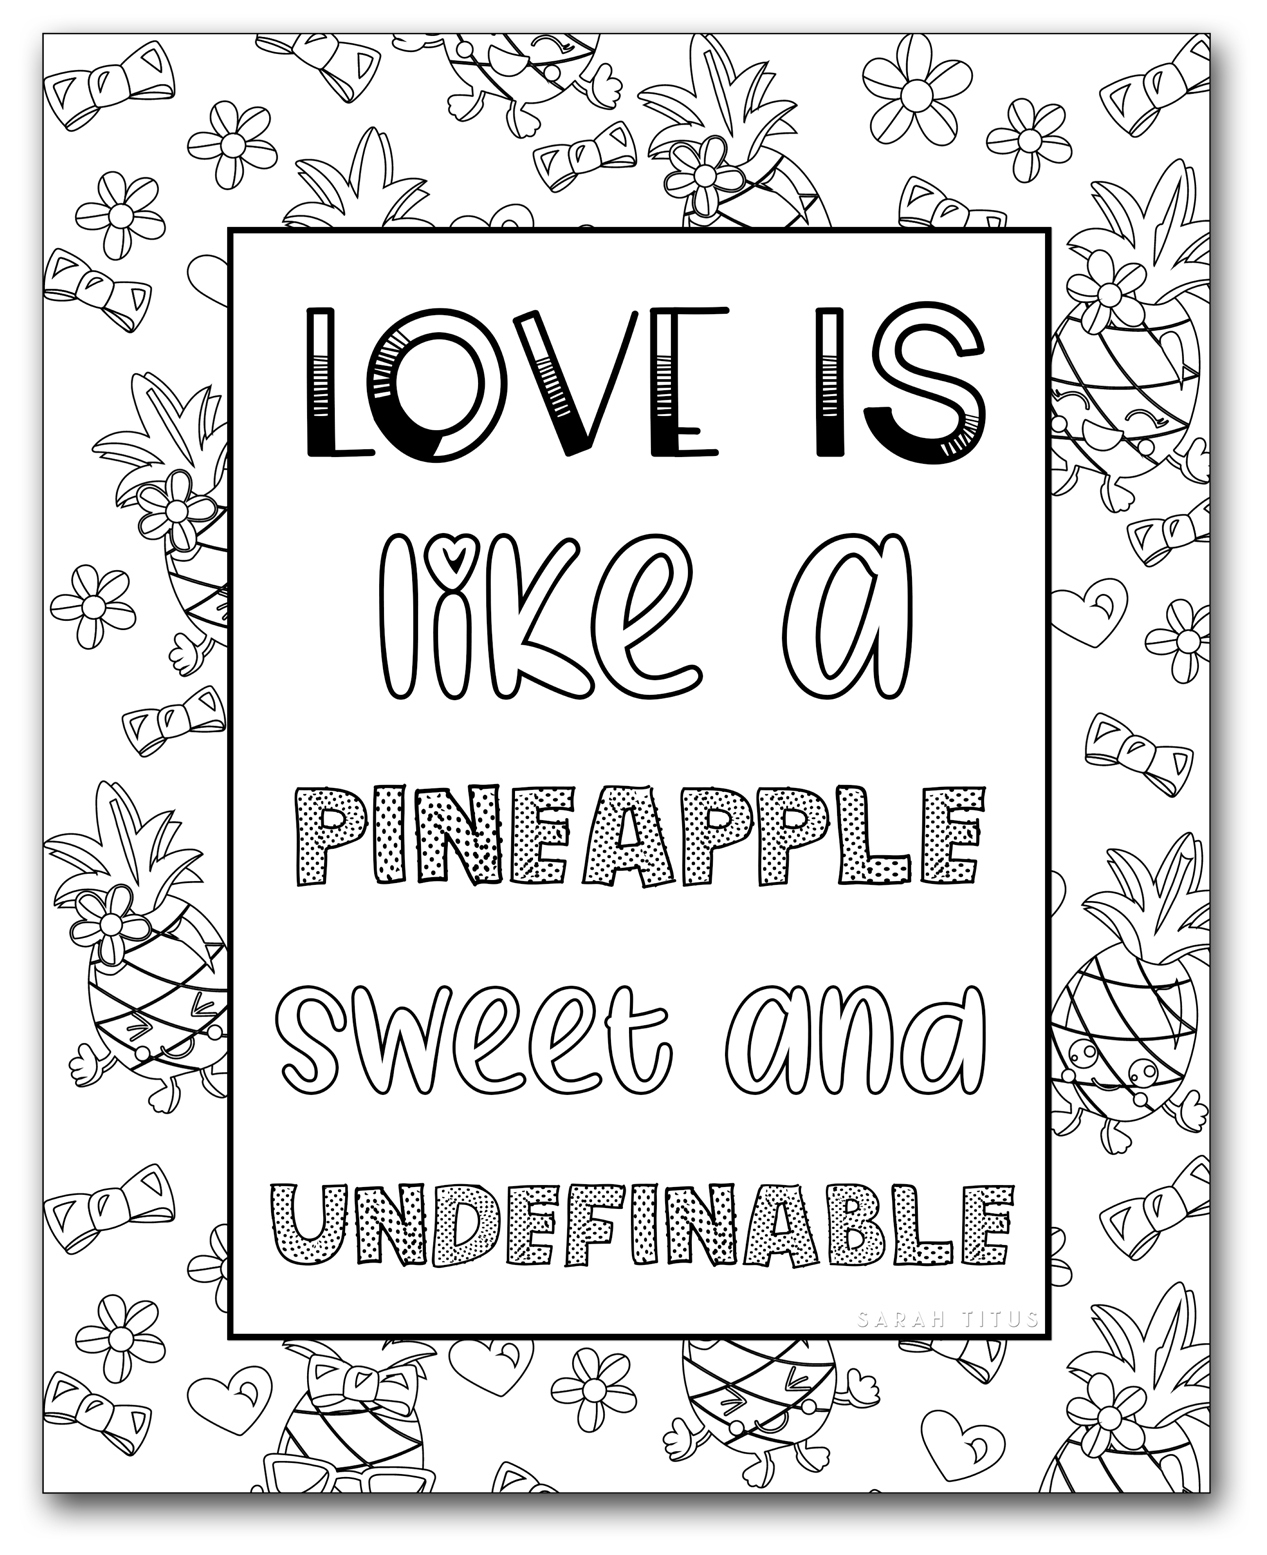 Printable Coloring Pages For Girls - Sarah Titus - Free Printable Coloring Pages For Teens